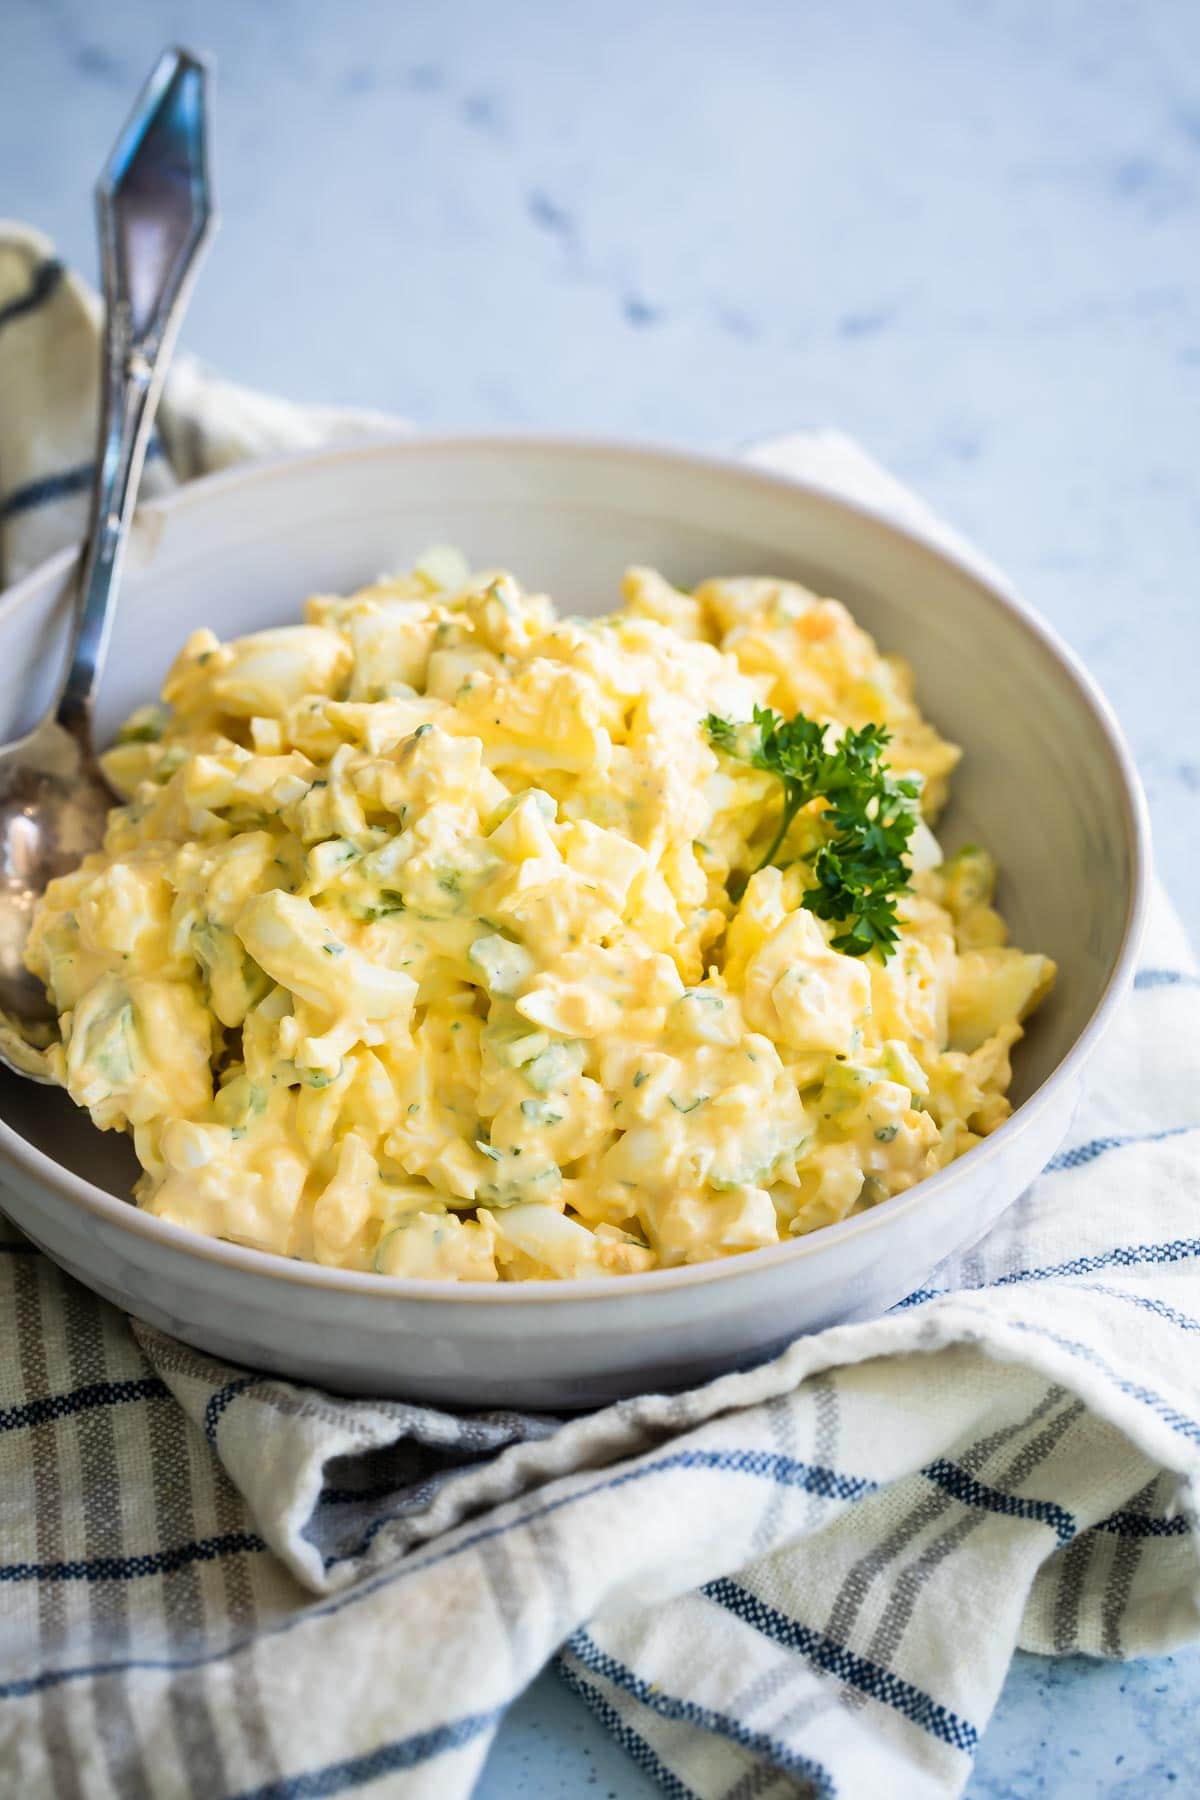 Egg salad in a white bowl.